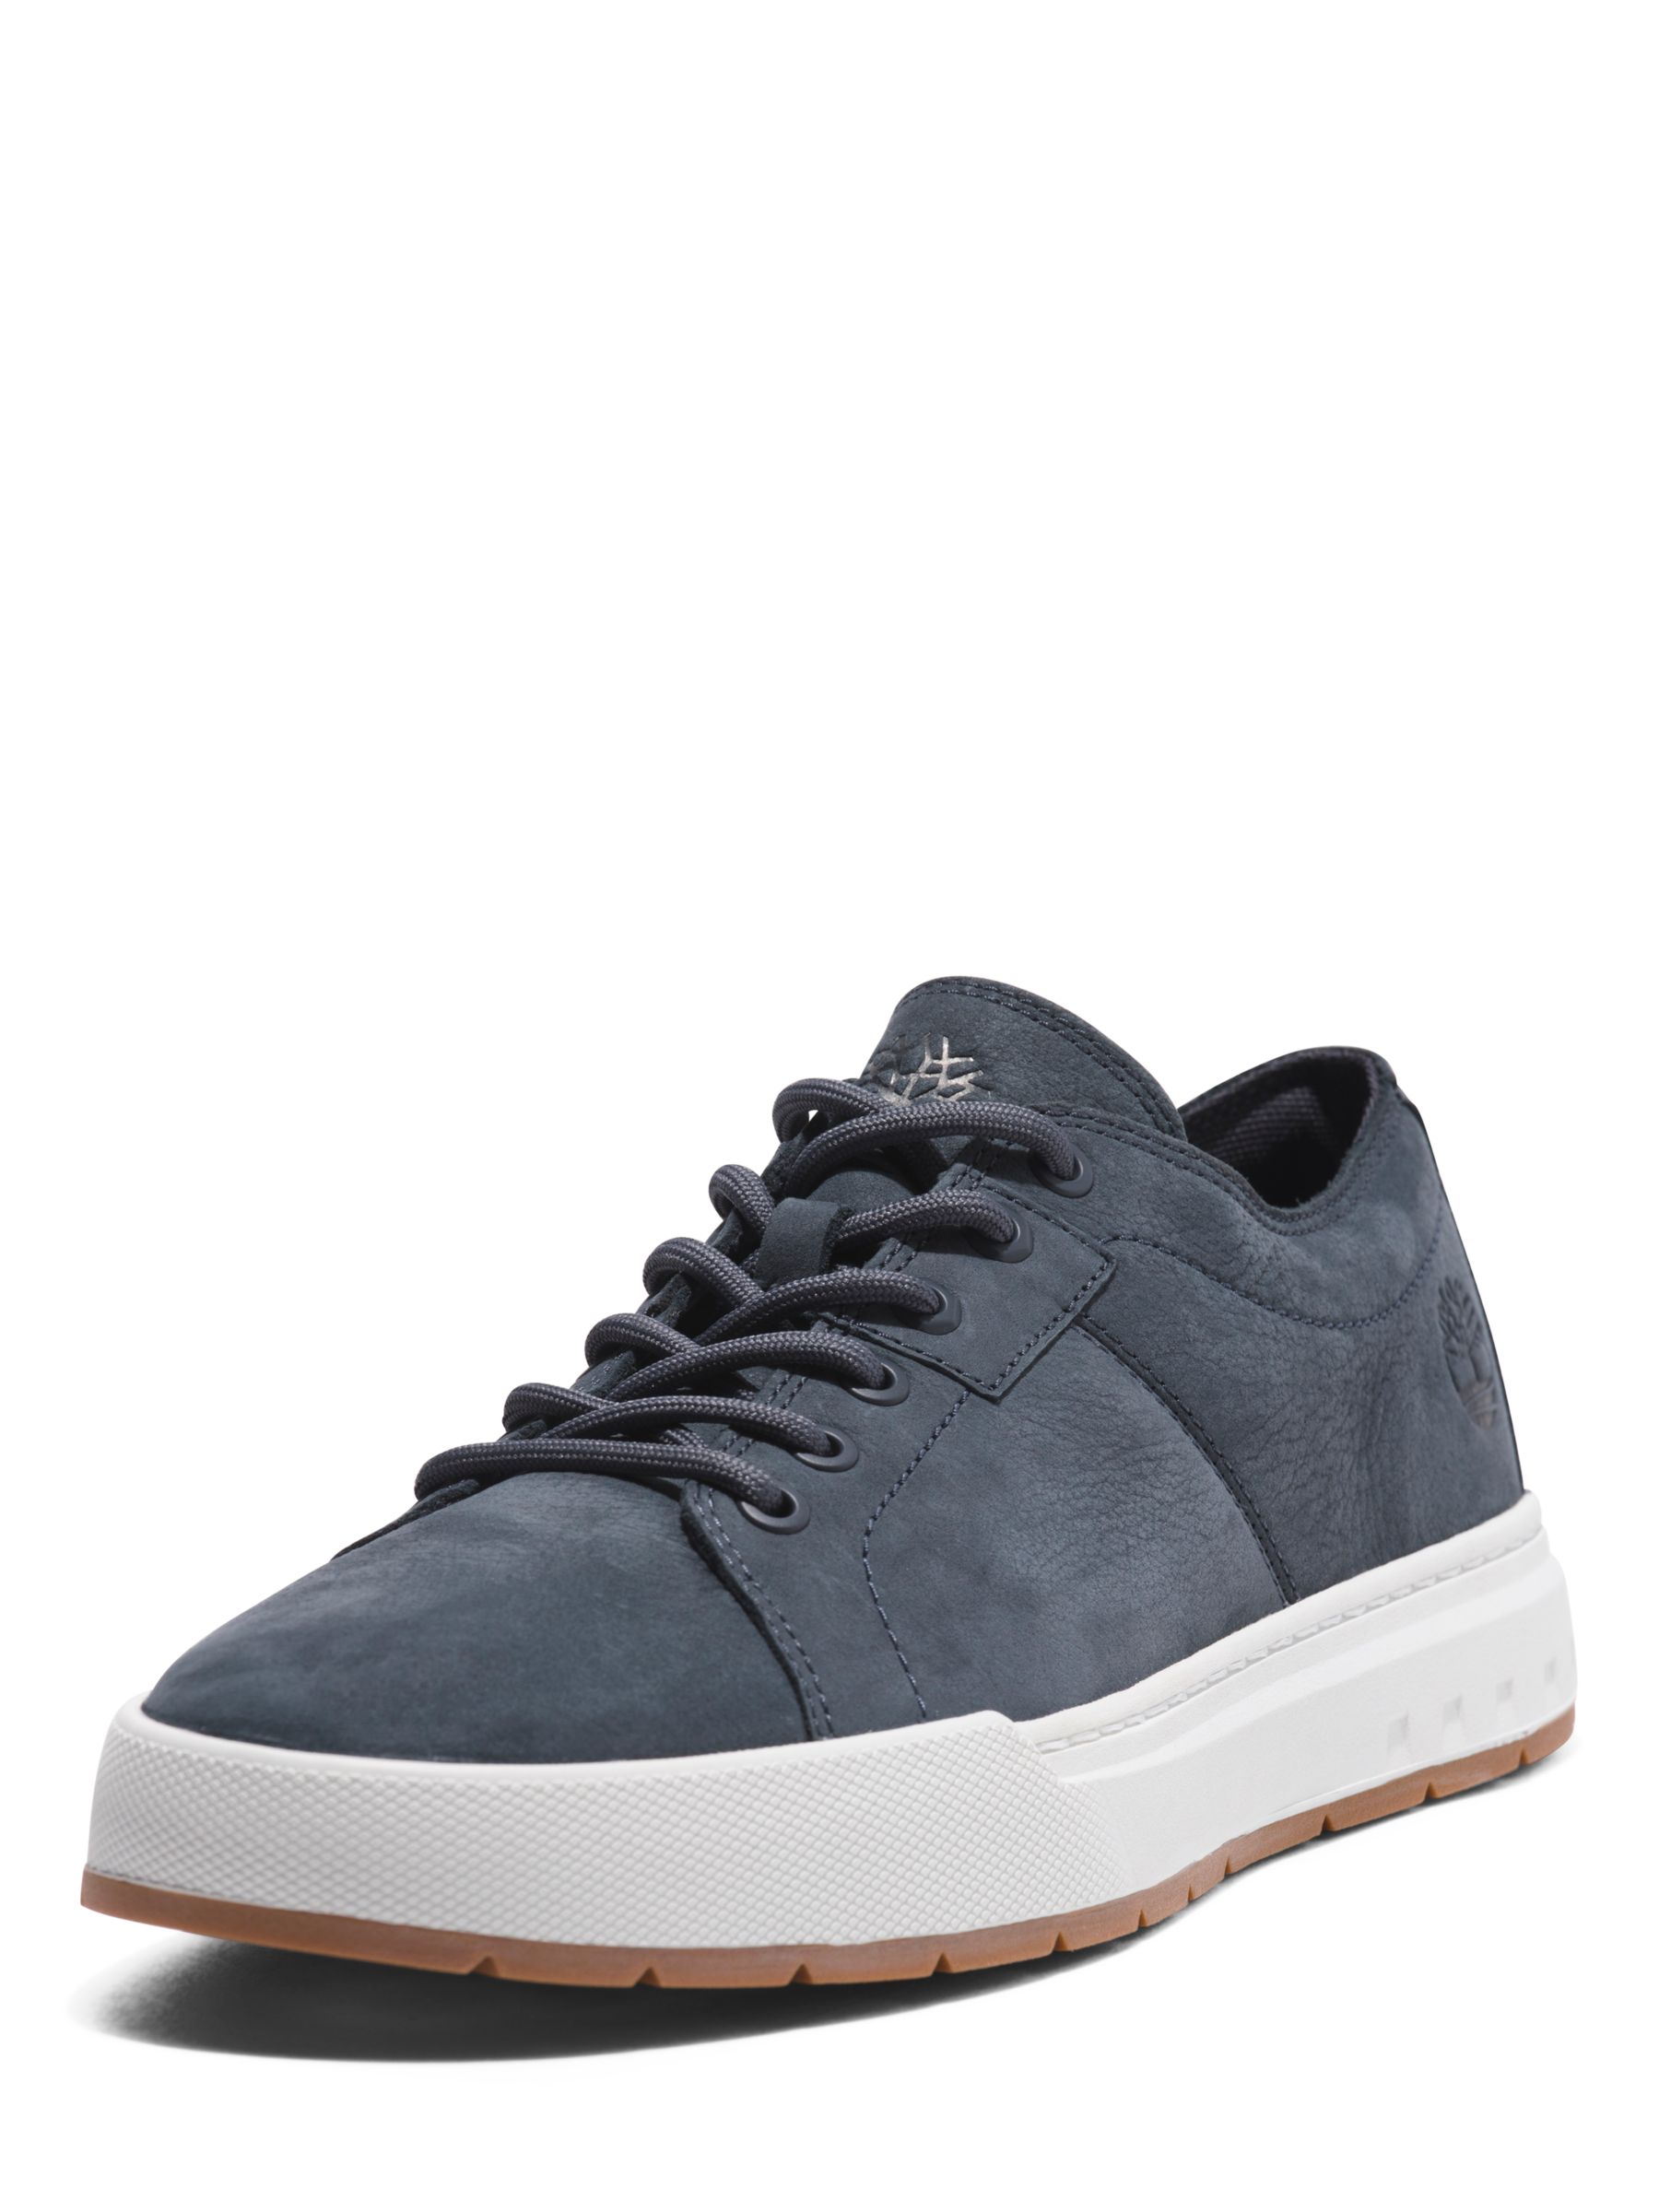 Buy Timberland Maple Grove Low Top Leather Trainers, Navy Online at johnlewis.com